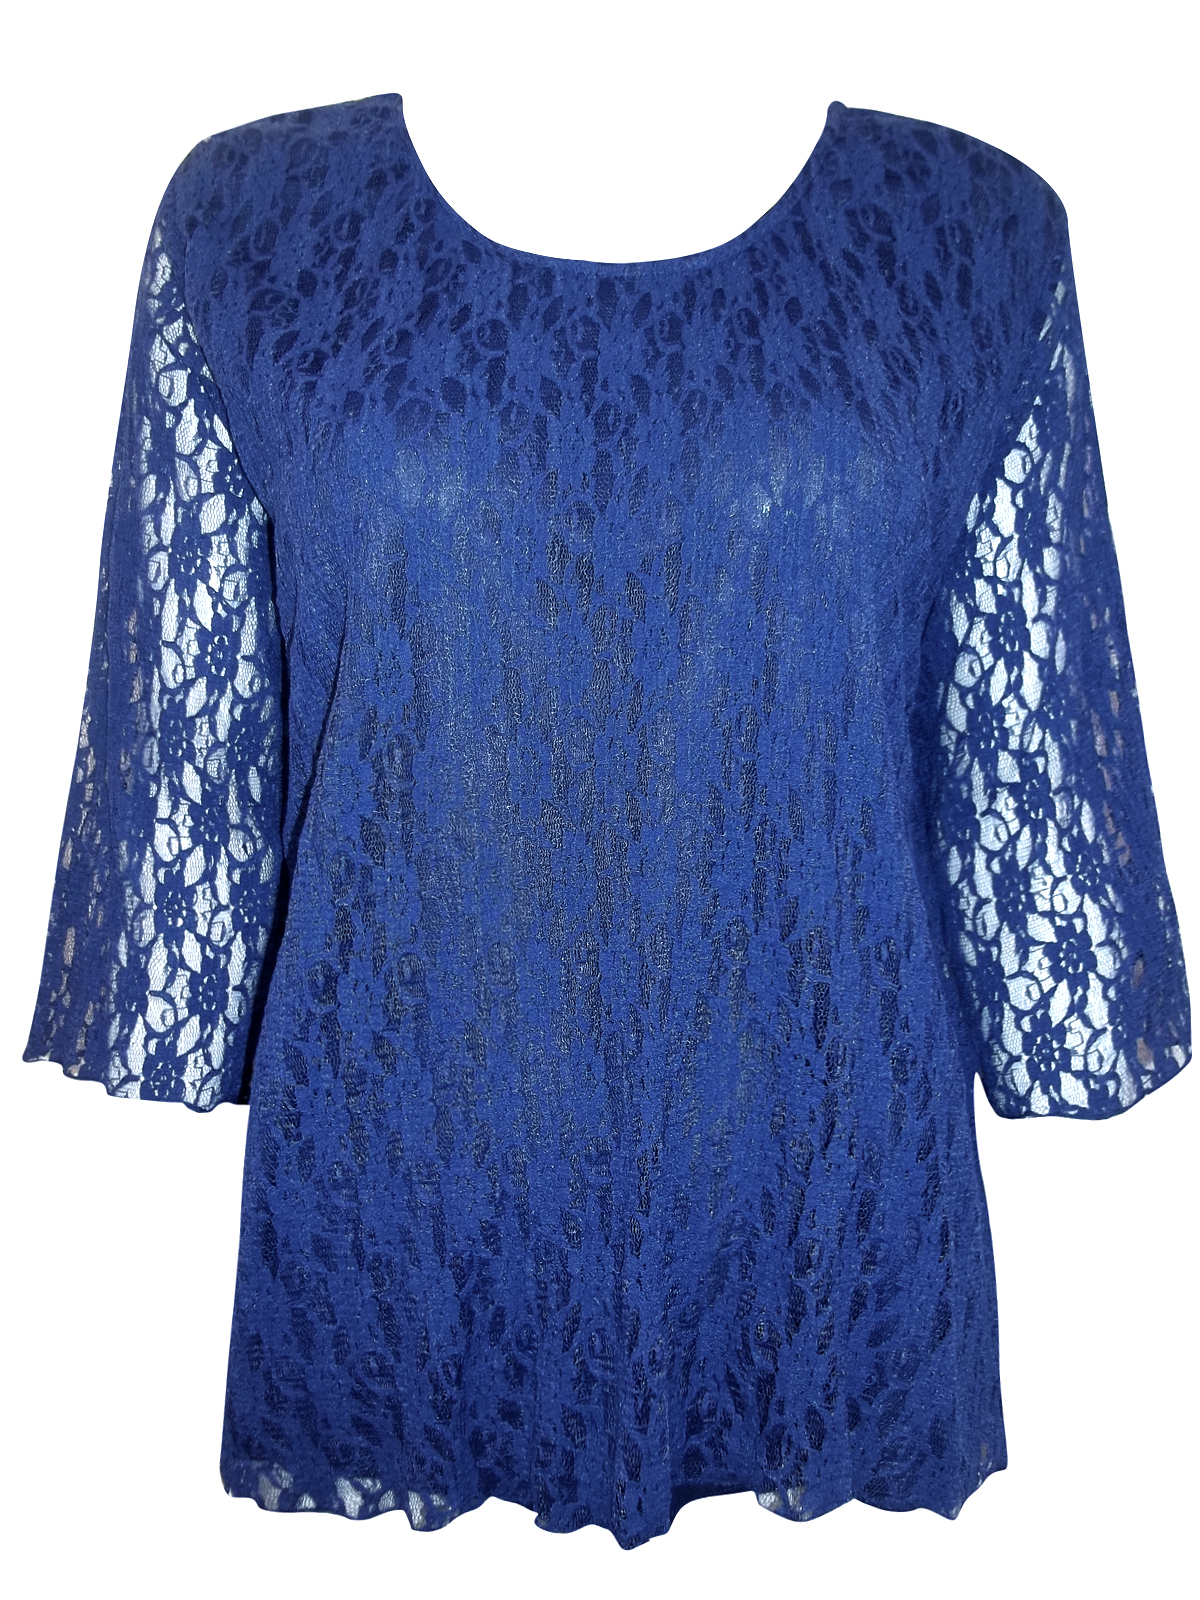 Eaonplus BLUE Overlaid Lace 3/4 Sleeve Top - Plus Size 18 to 32